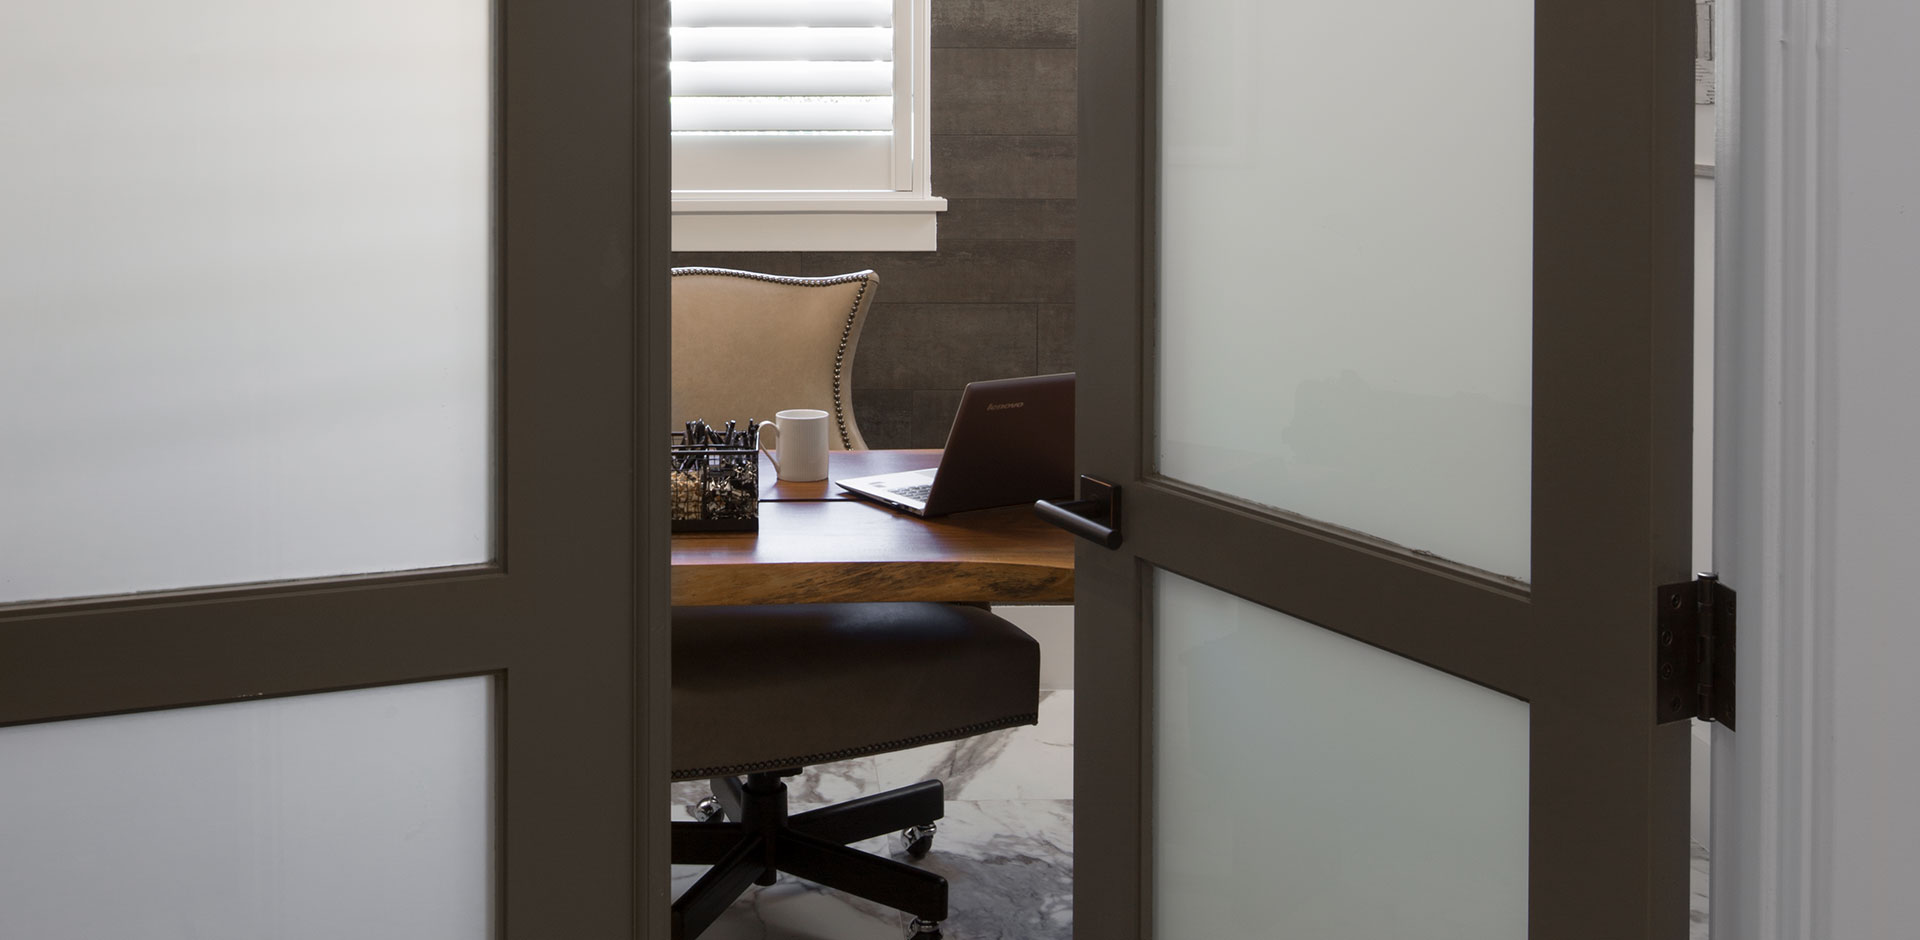 Looking into an office through a pair of TS3000 doors in MDF with white lami glass